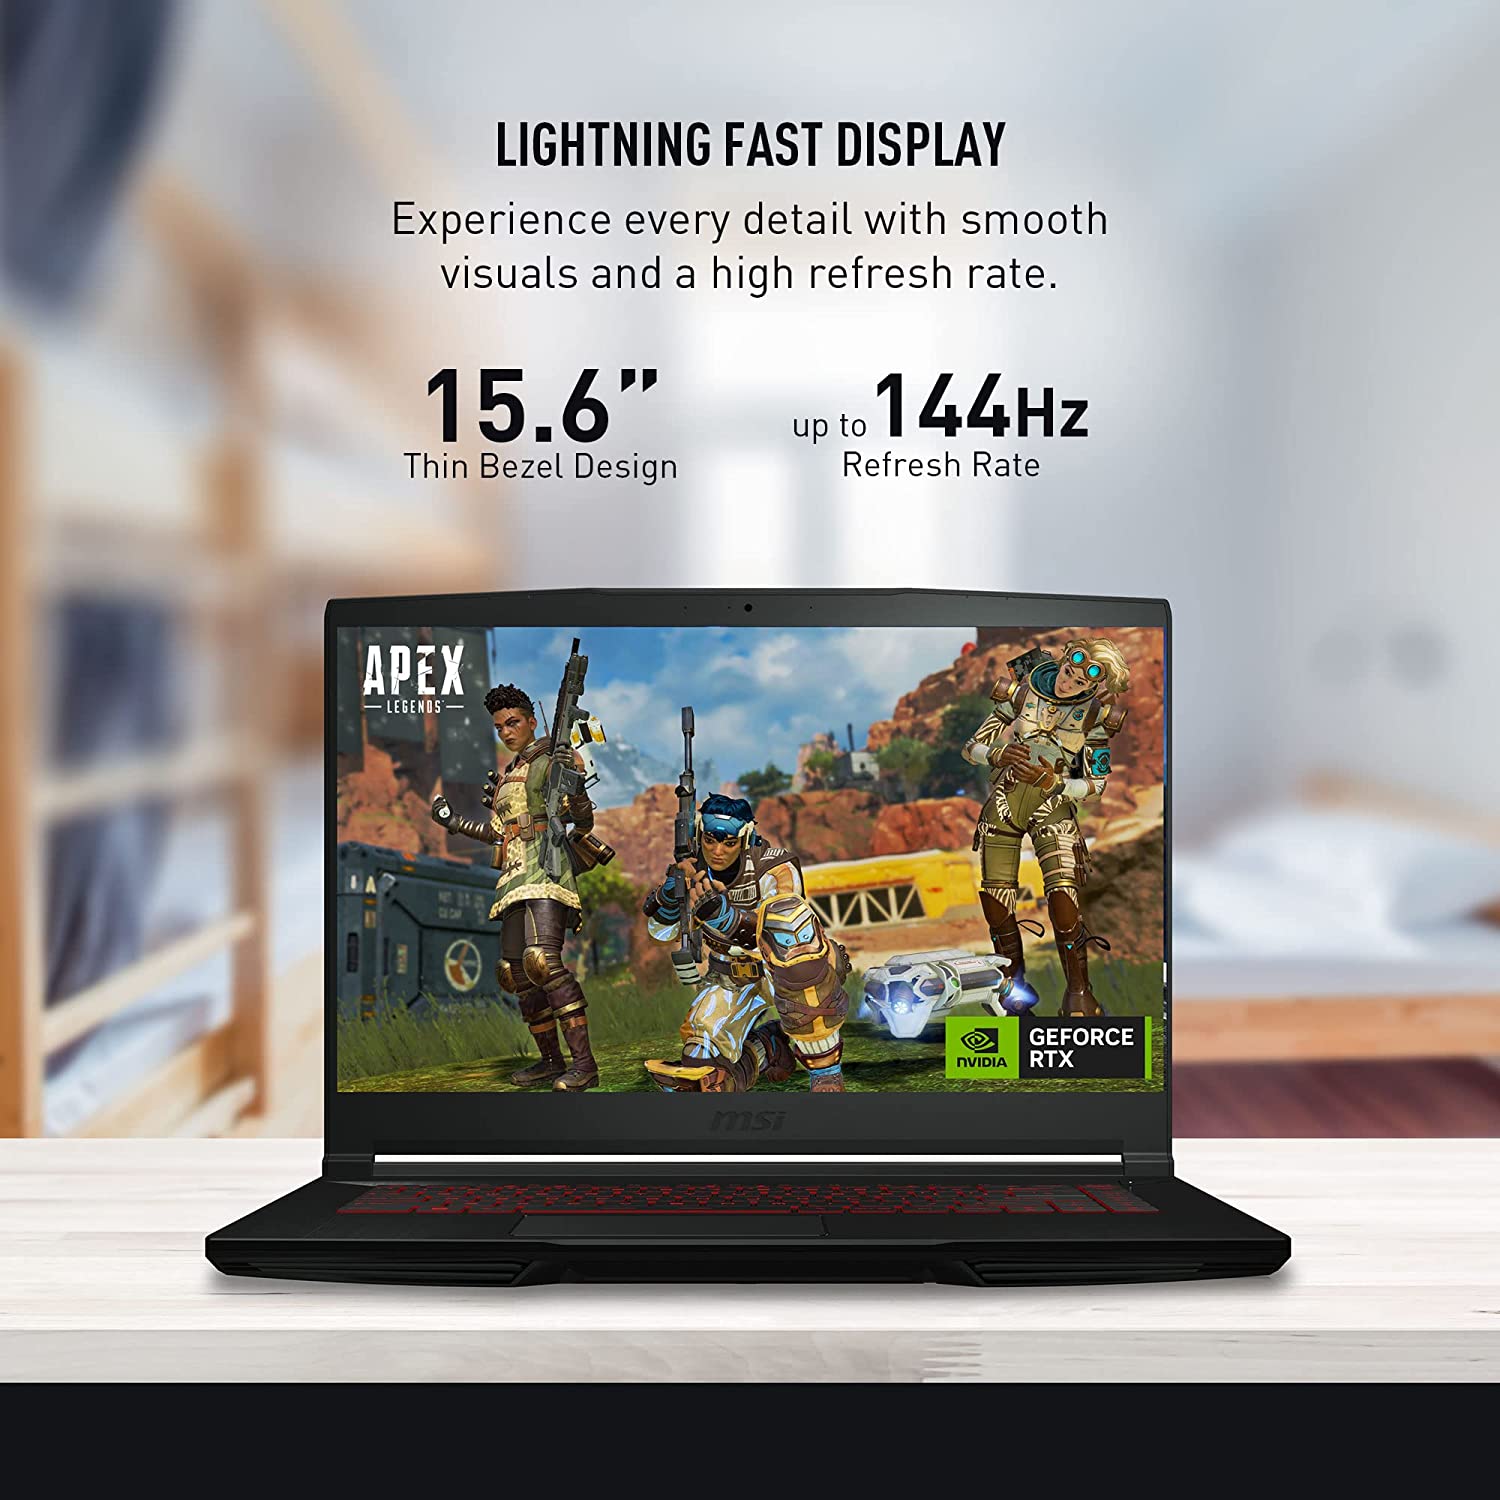 MSI Thin GF63 15.6" 144Hz Gaming Laptop: 12th Gen Intel Core i7, NVIDIA GeForce RTX 4050, 16GB DDR4, 512GB NVMe SSD, Type-C, Cooler Boost 5, Win11 Home: Black 12VE-066US